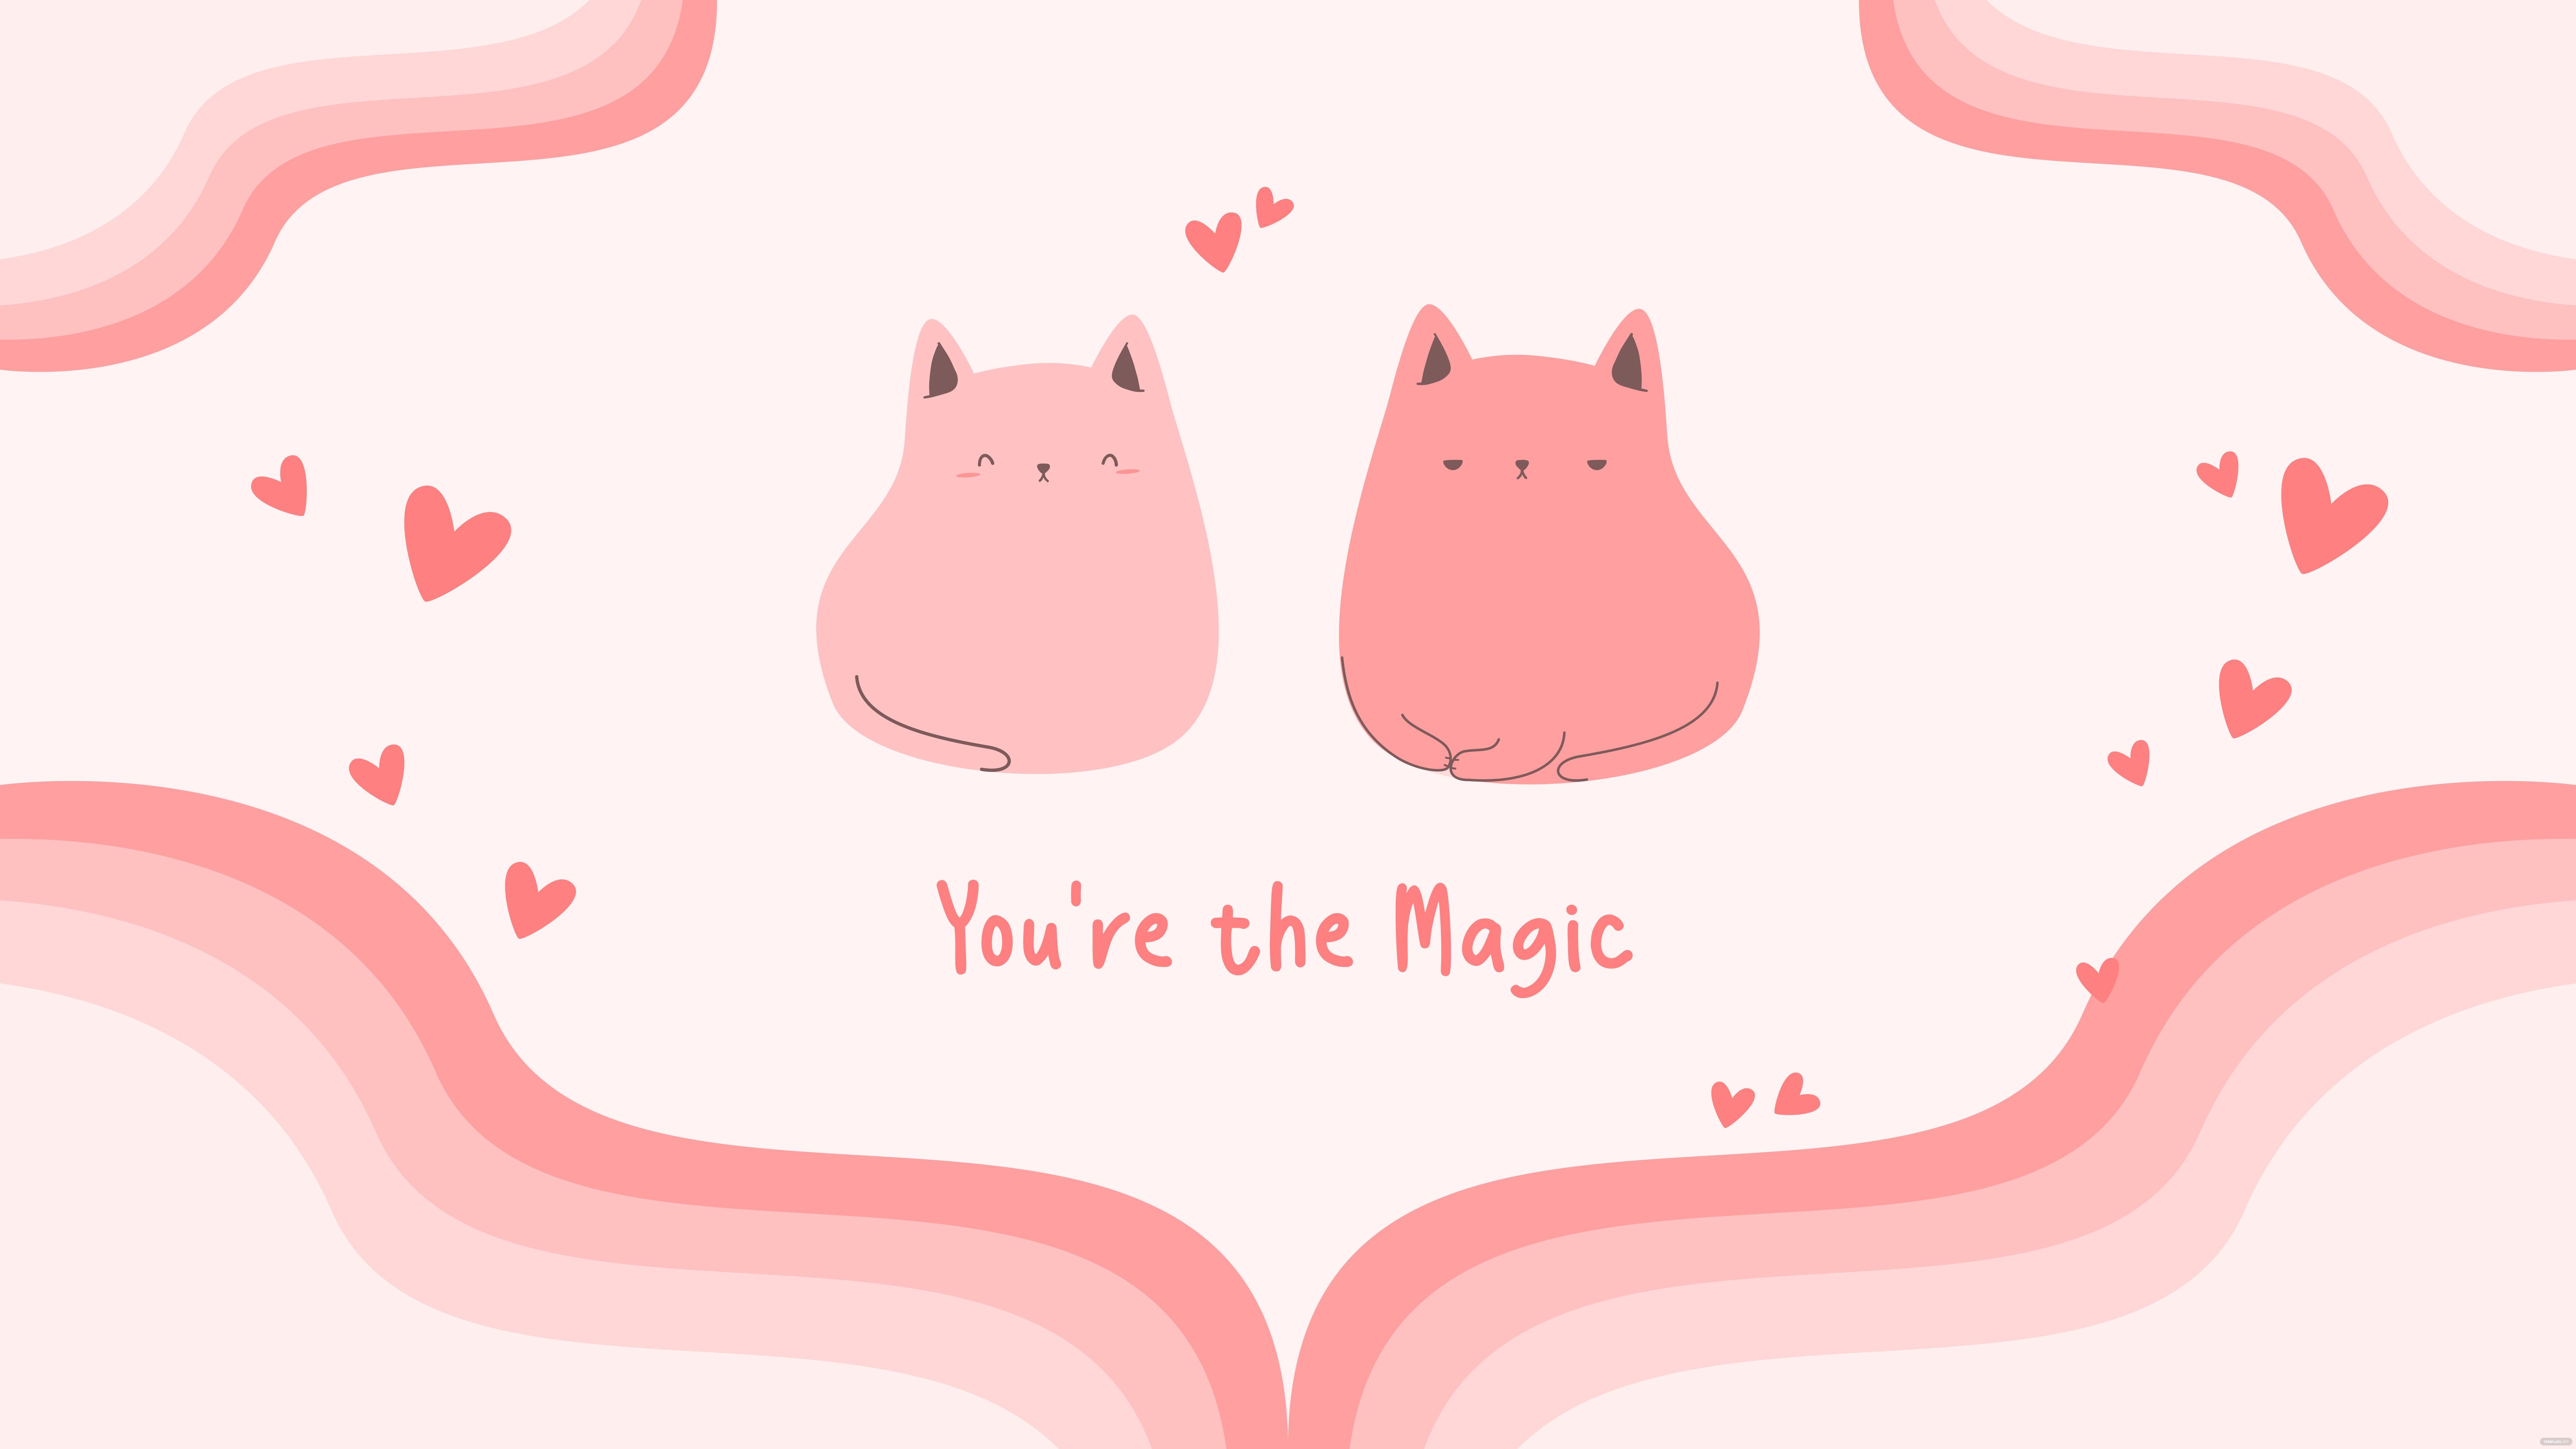 Two cats in love, hearts and the text 